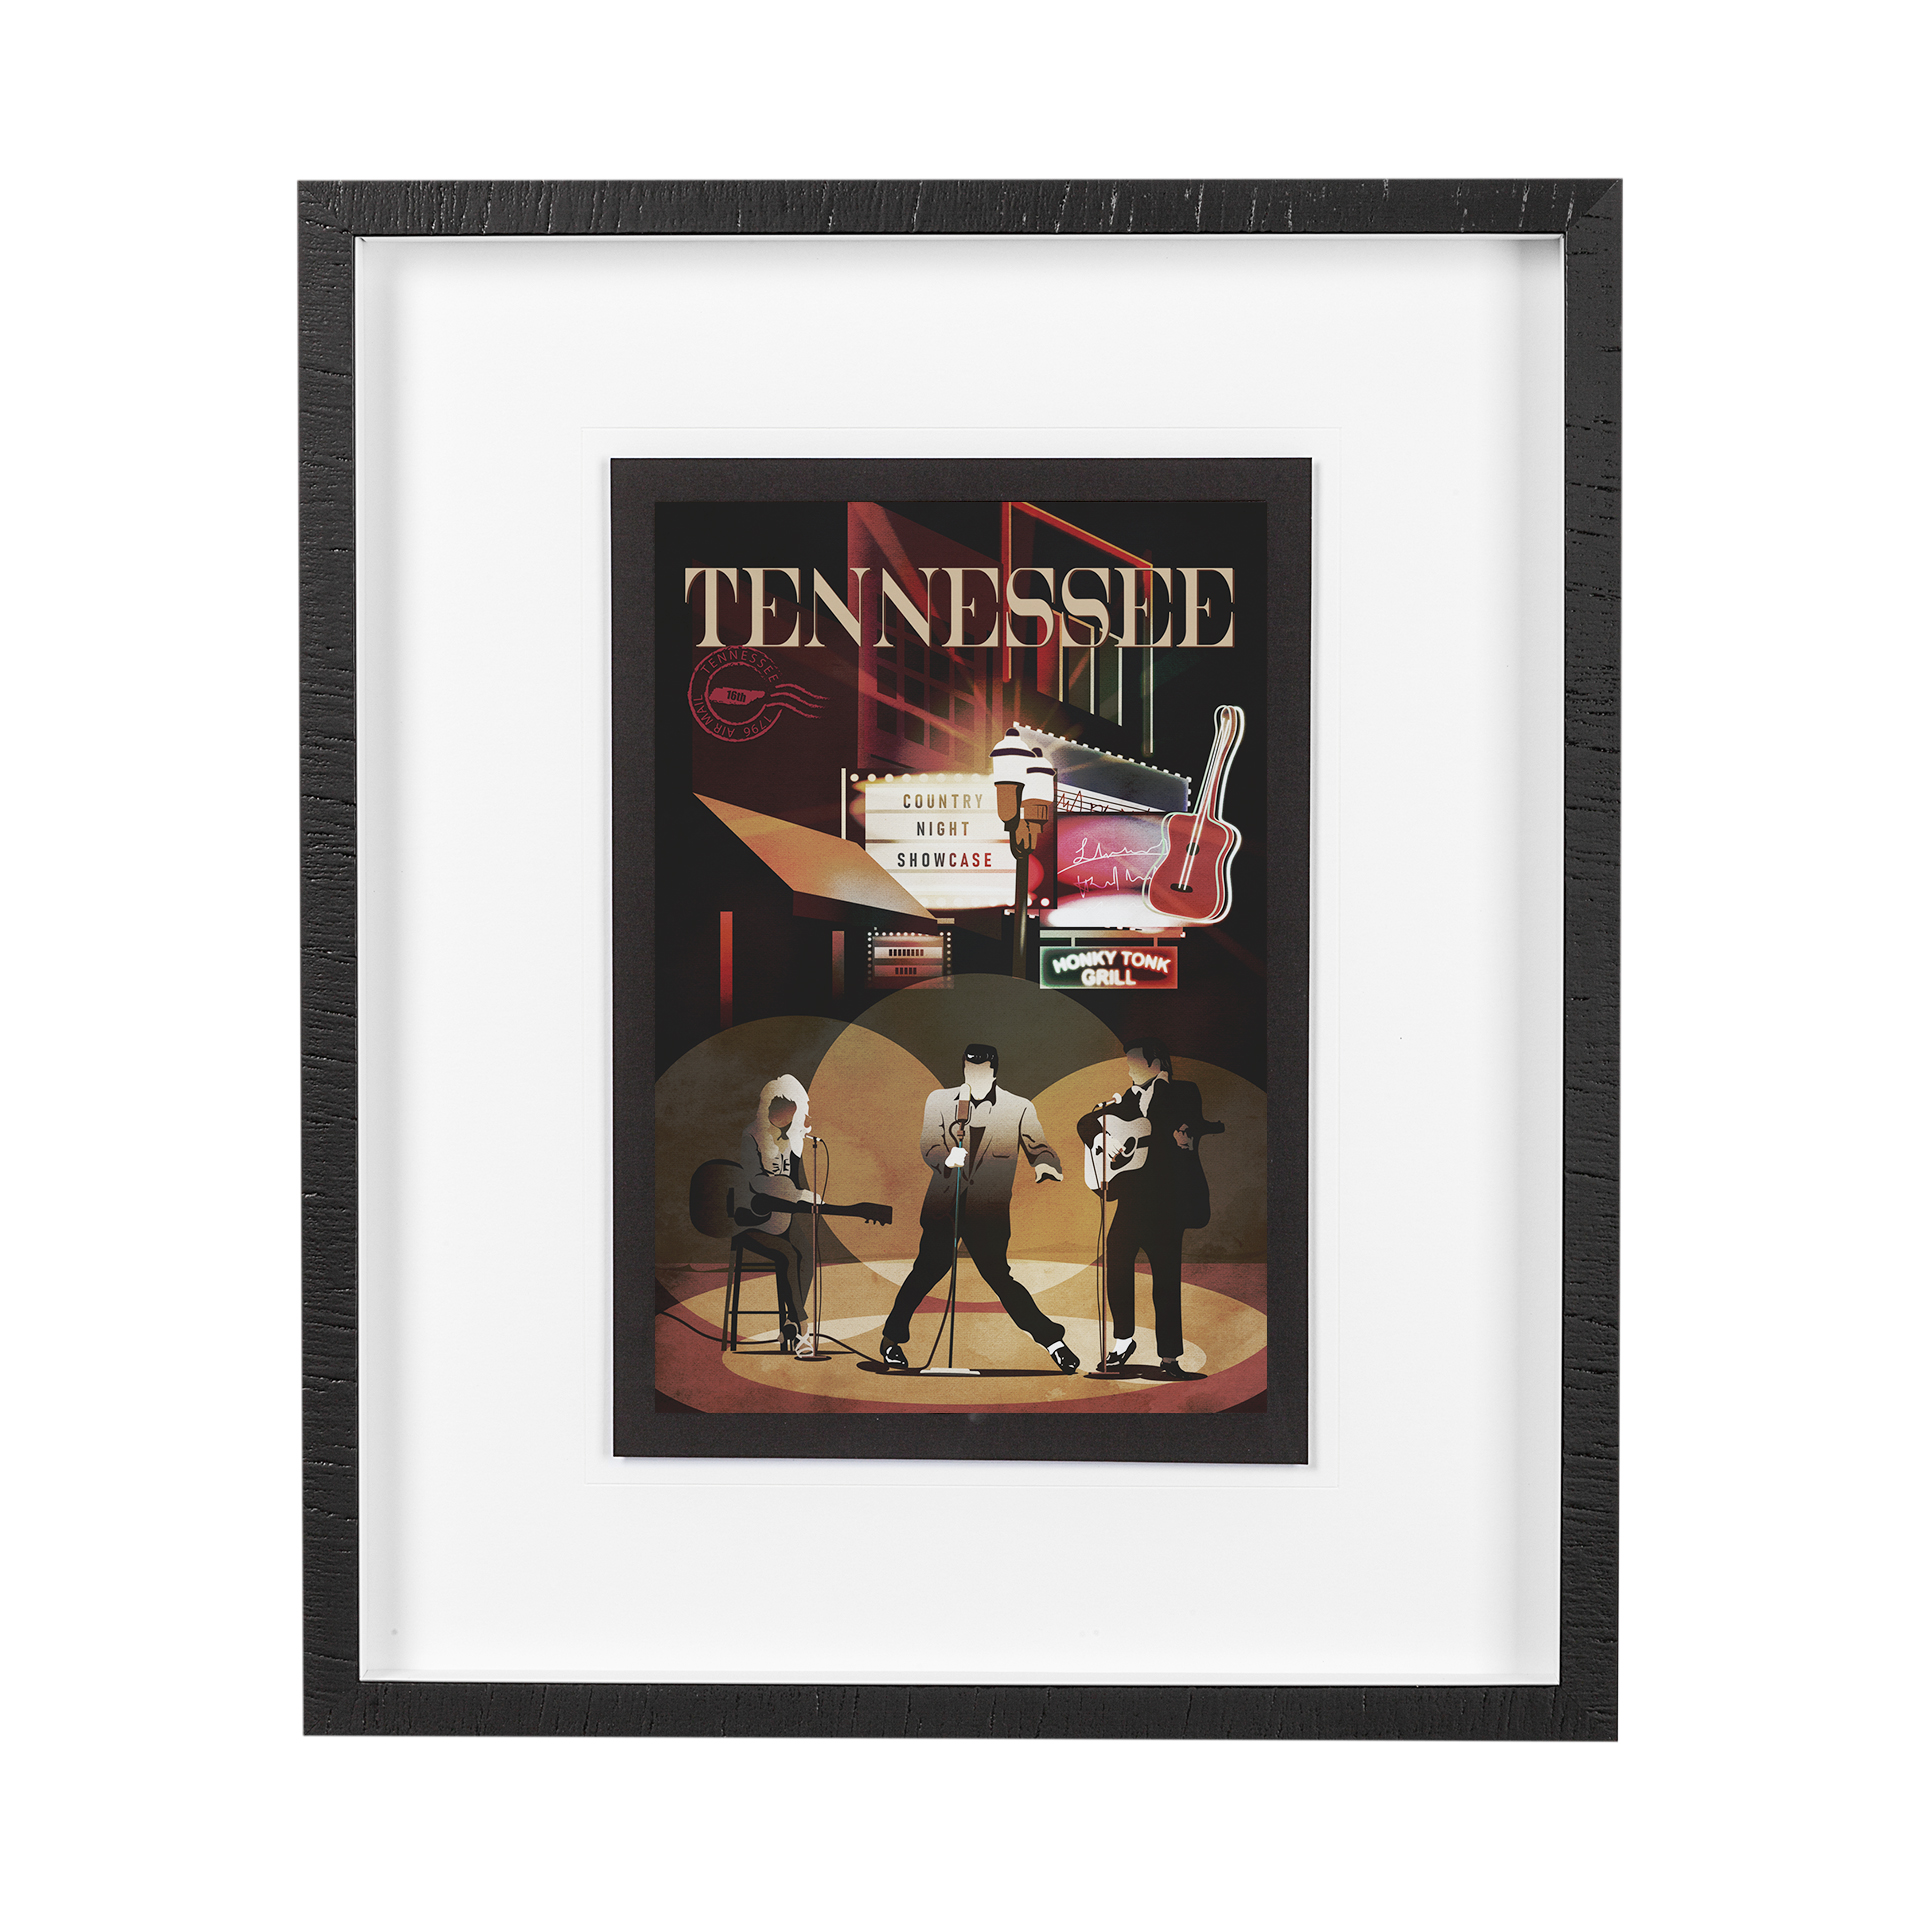 Tennessee Go (M) (22 x 26)